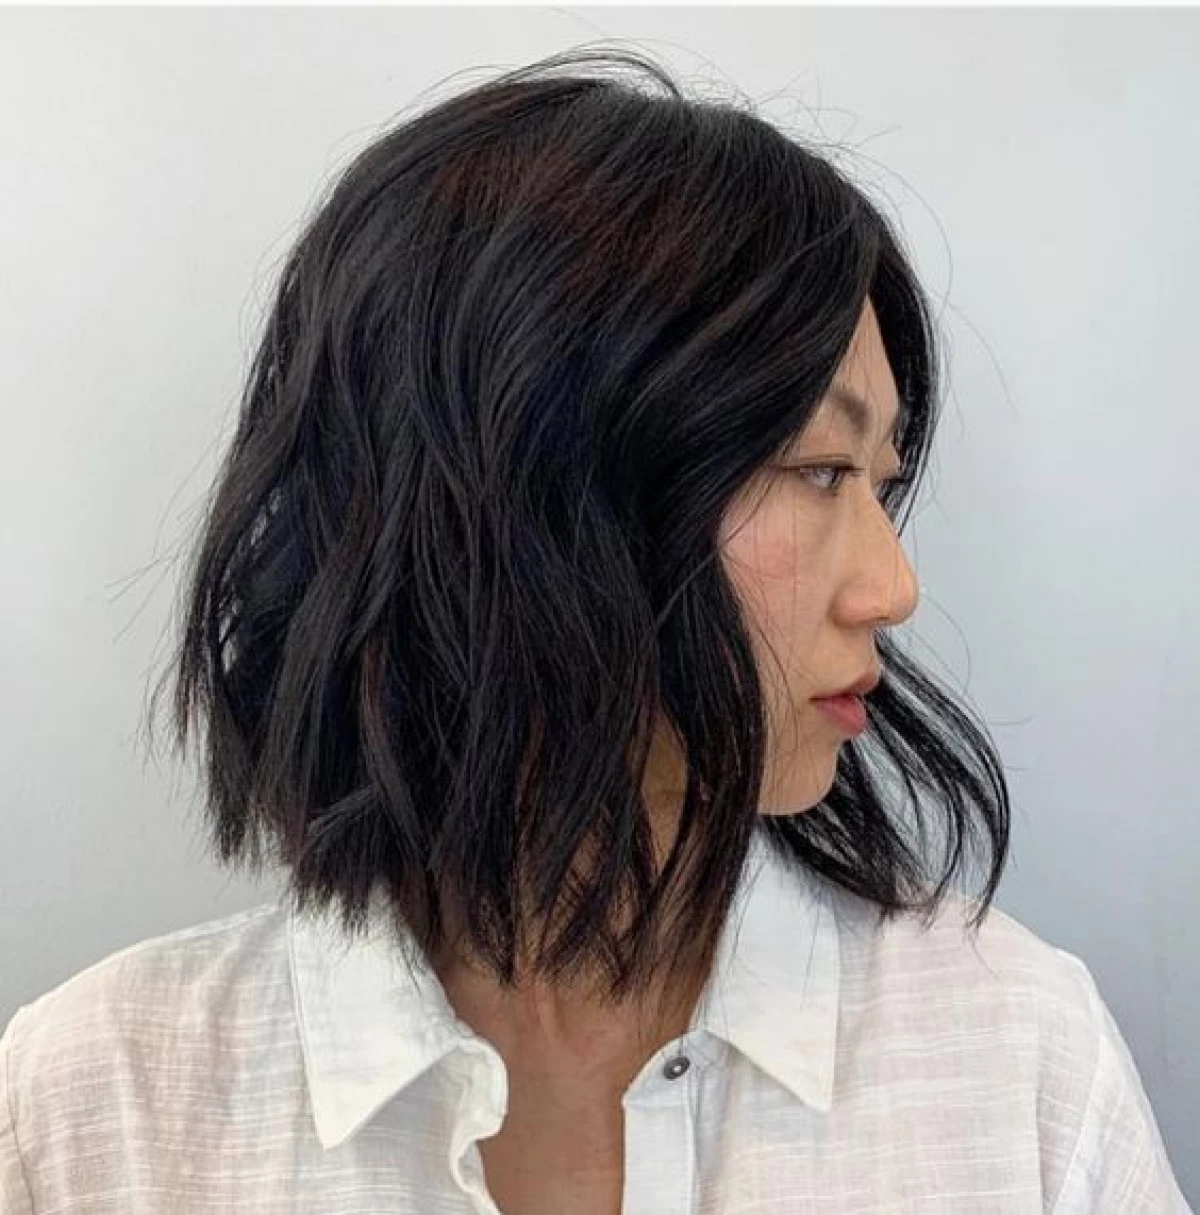 Super-stylish and simple styling on short black hair 4577_4